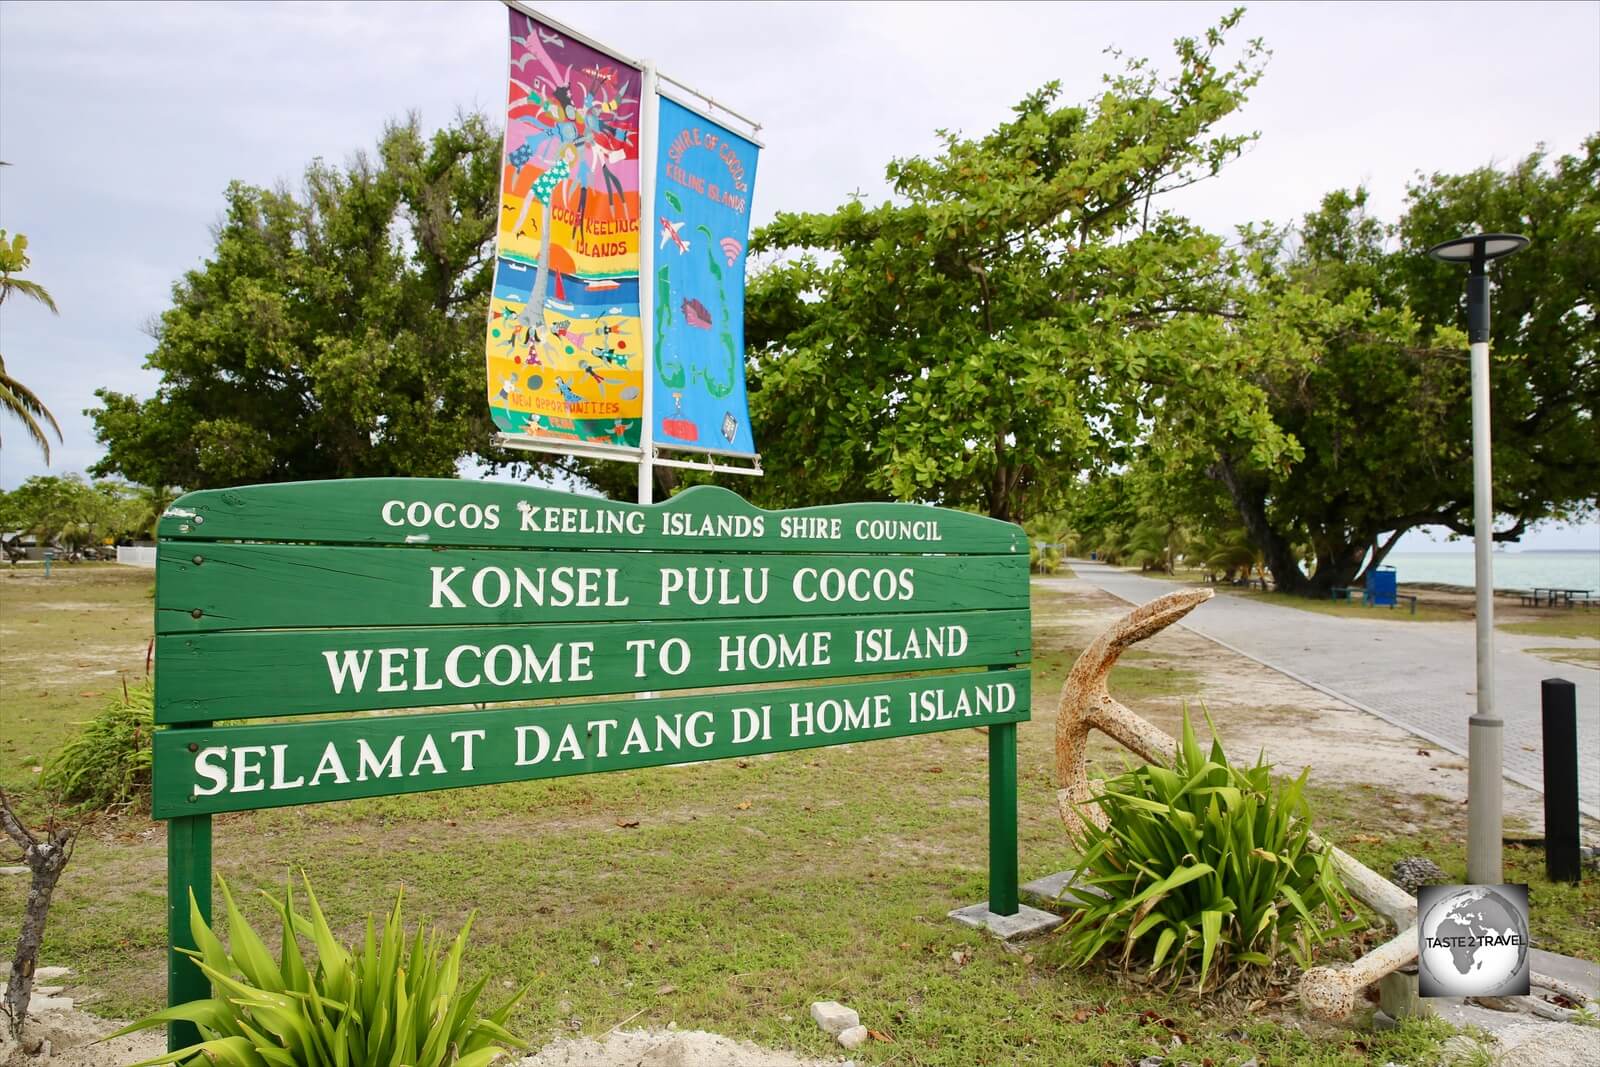 The Home Island 'Welcome' sign.